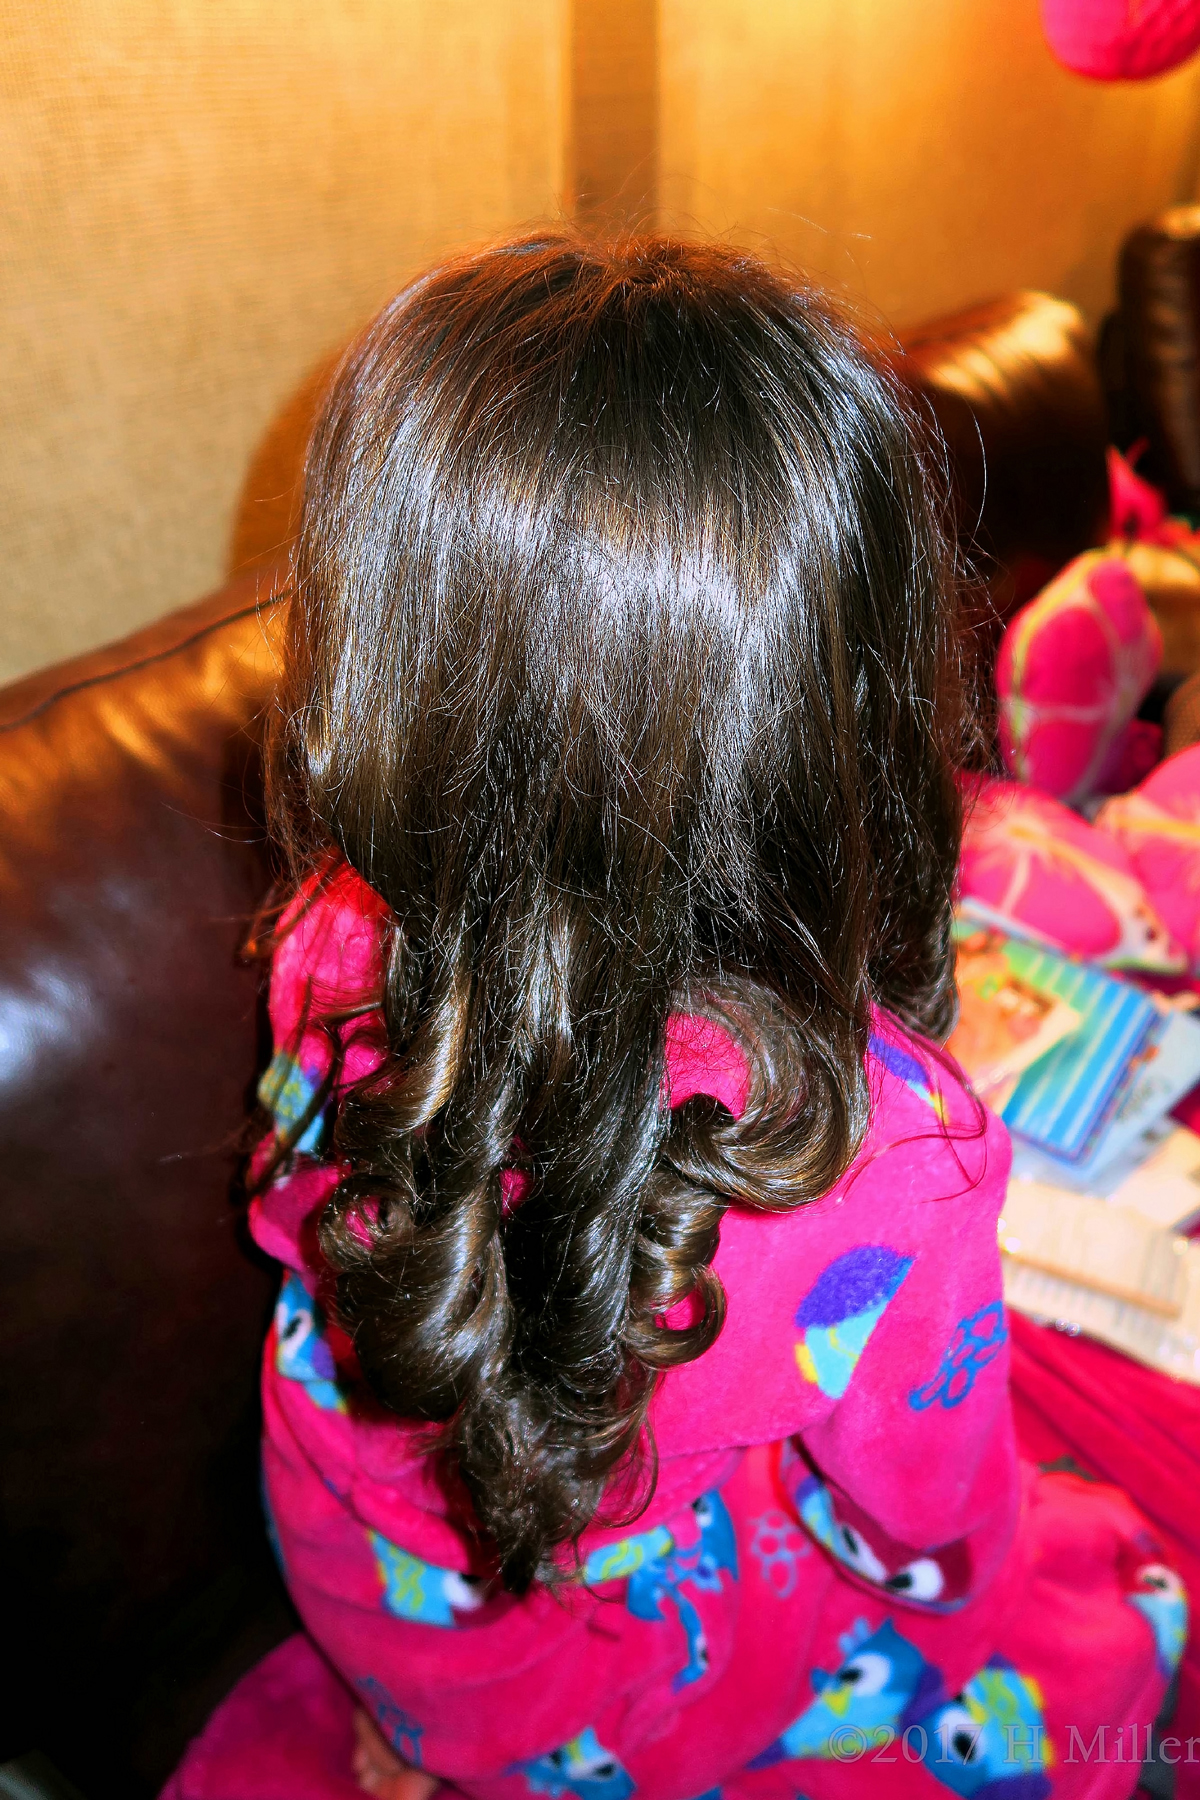 Another Closeup Of Her Curls. 